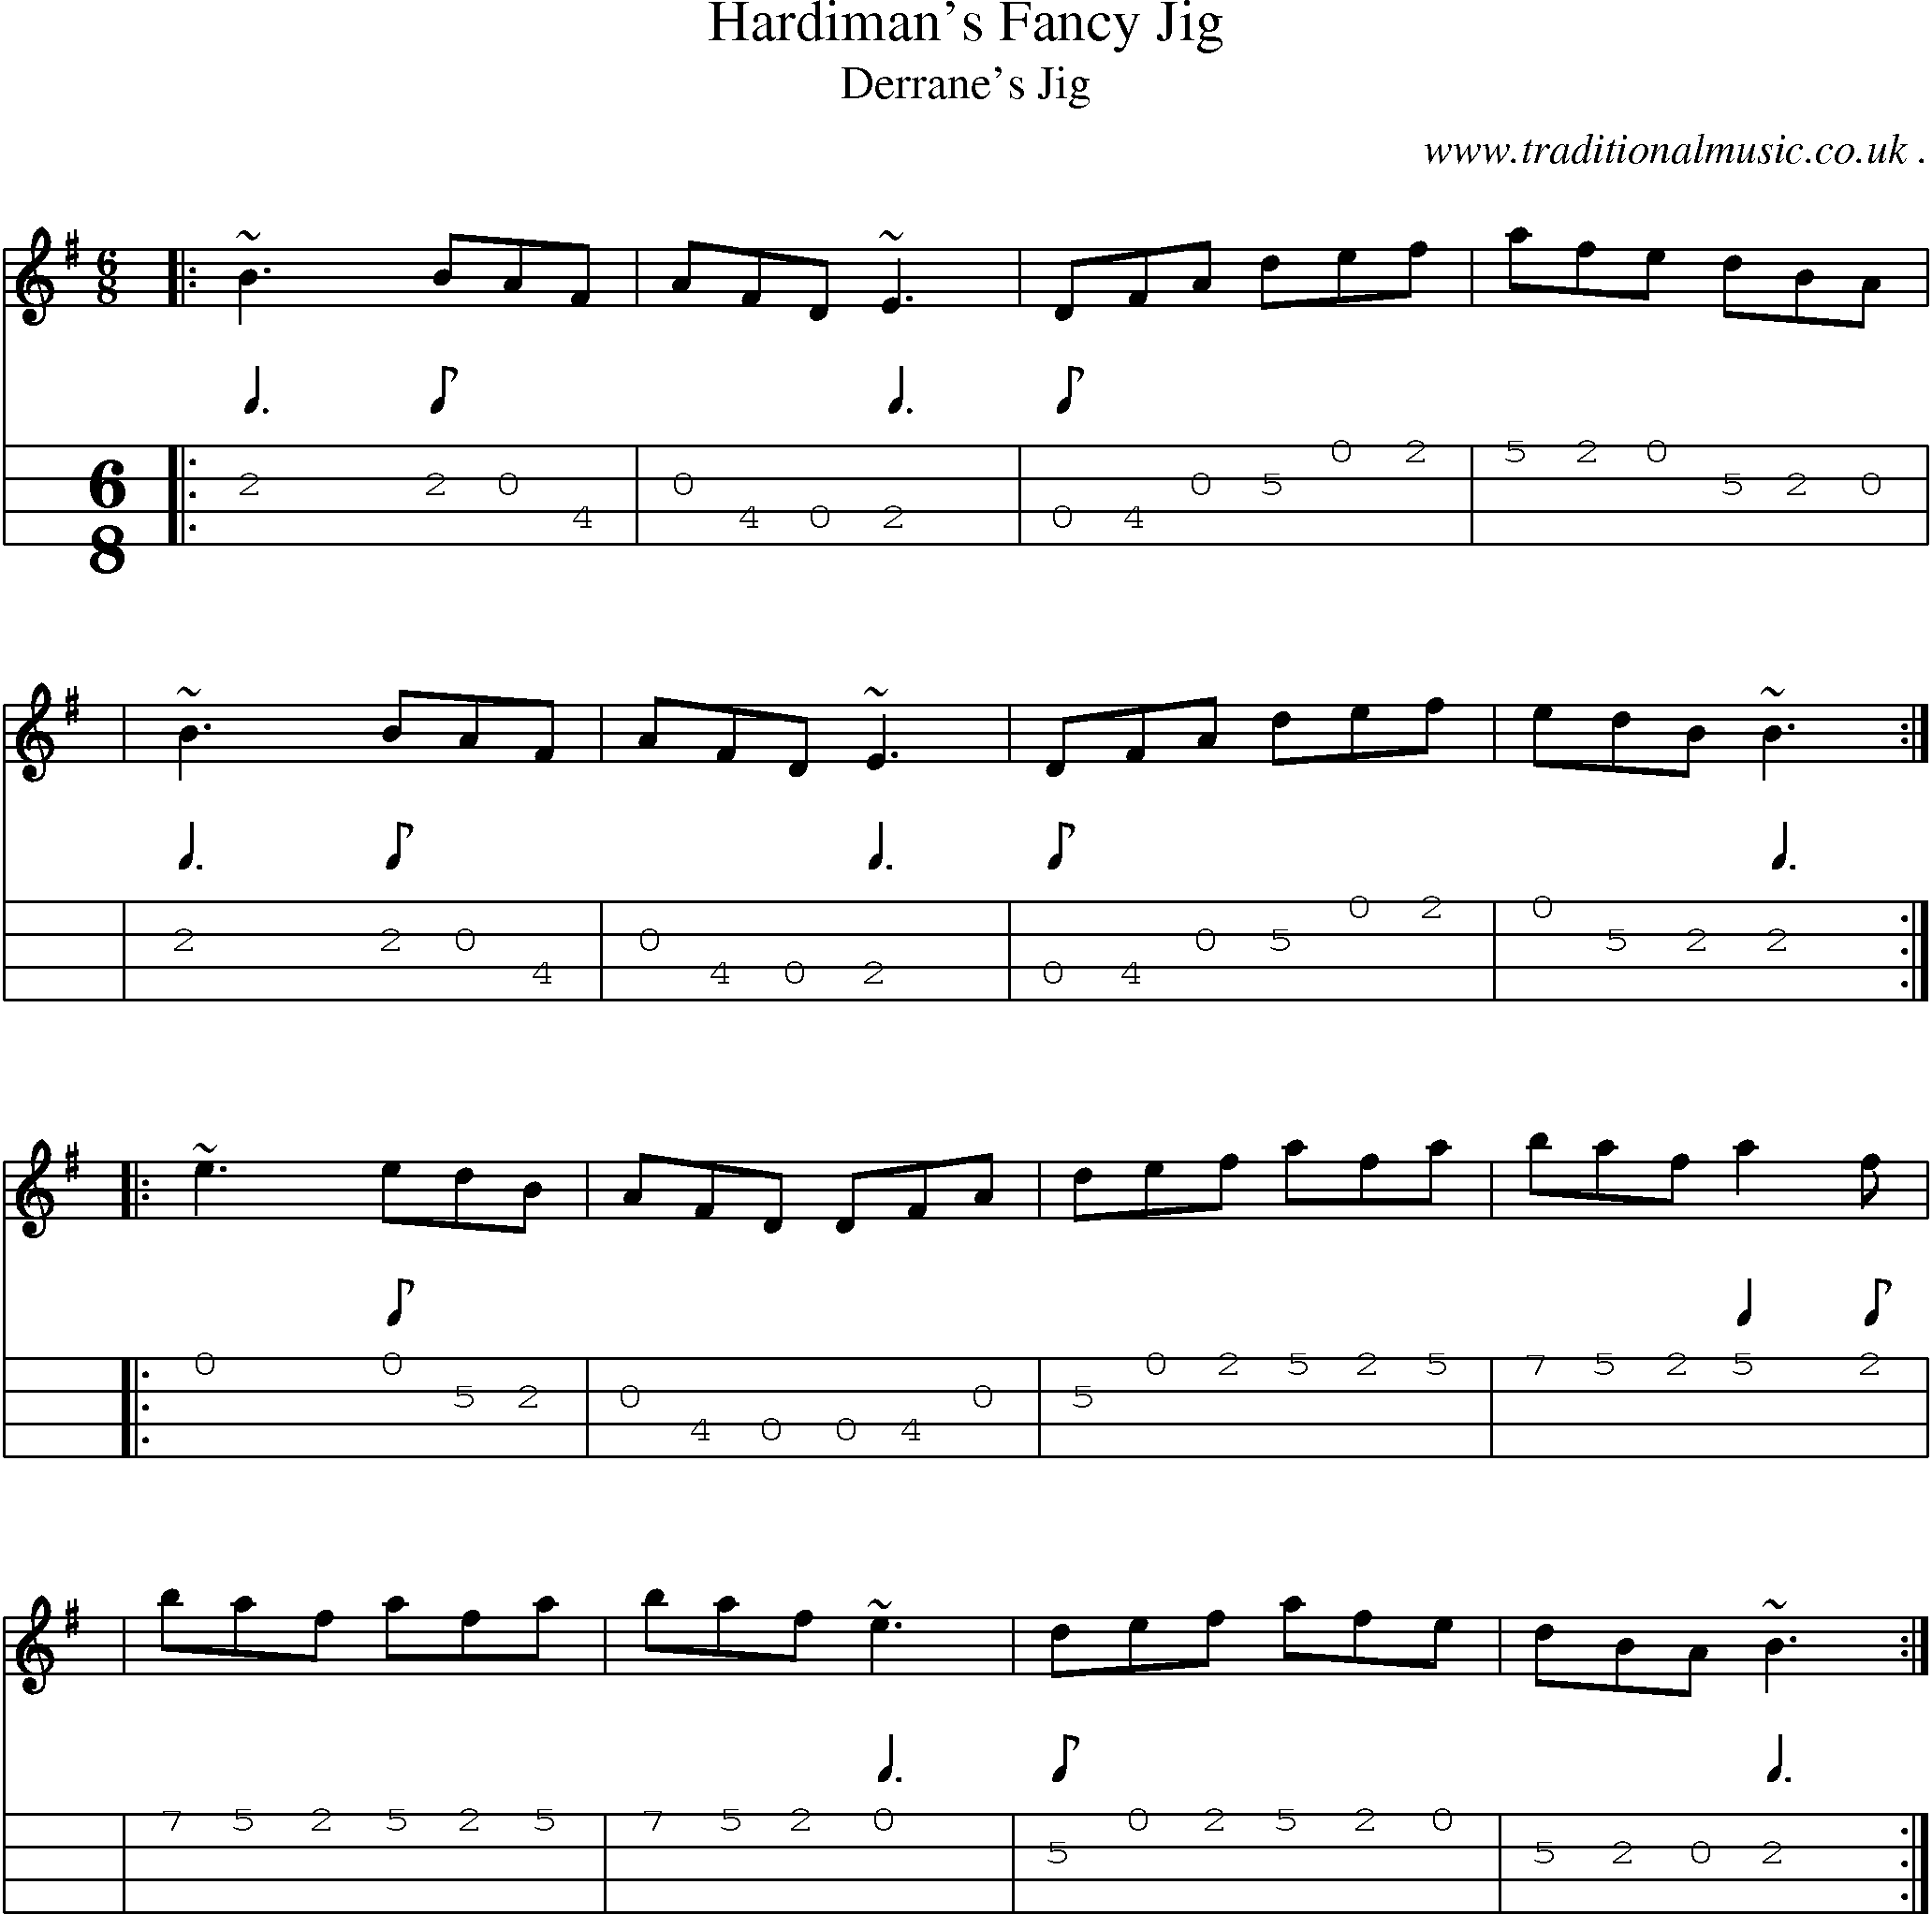 Sheet-music  score, Chords and Mandolin Tabs for Hardimans Fancy Jig